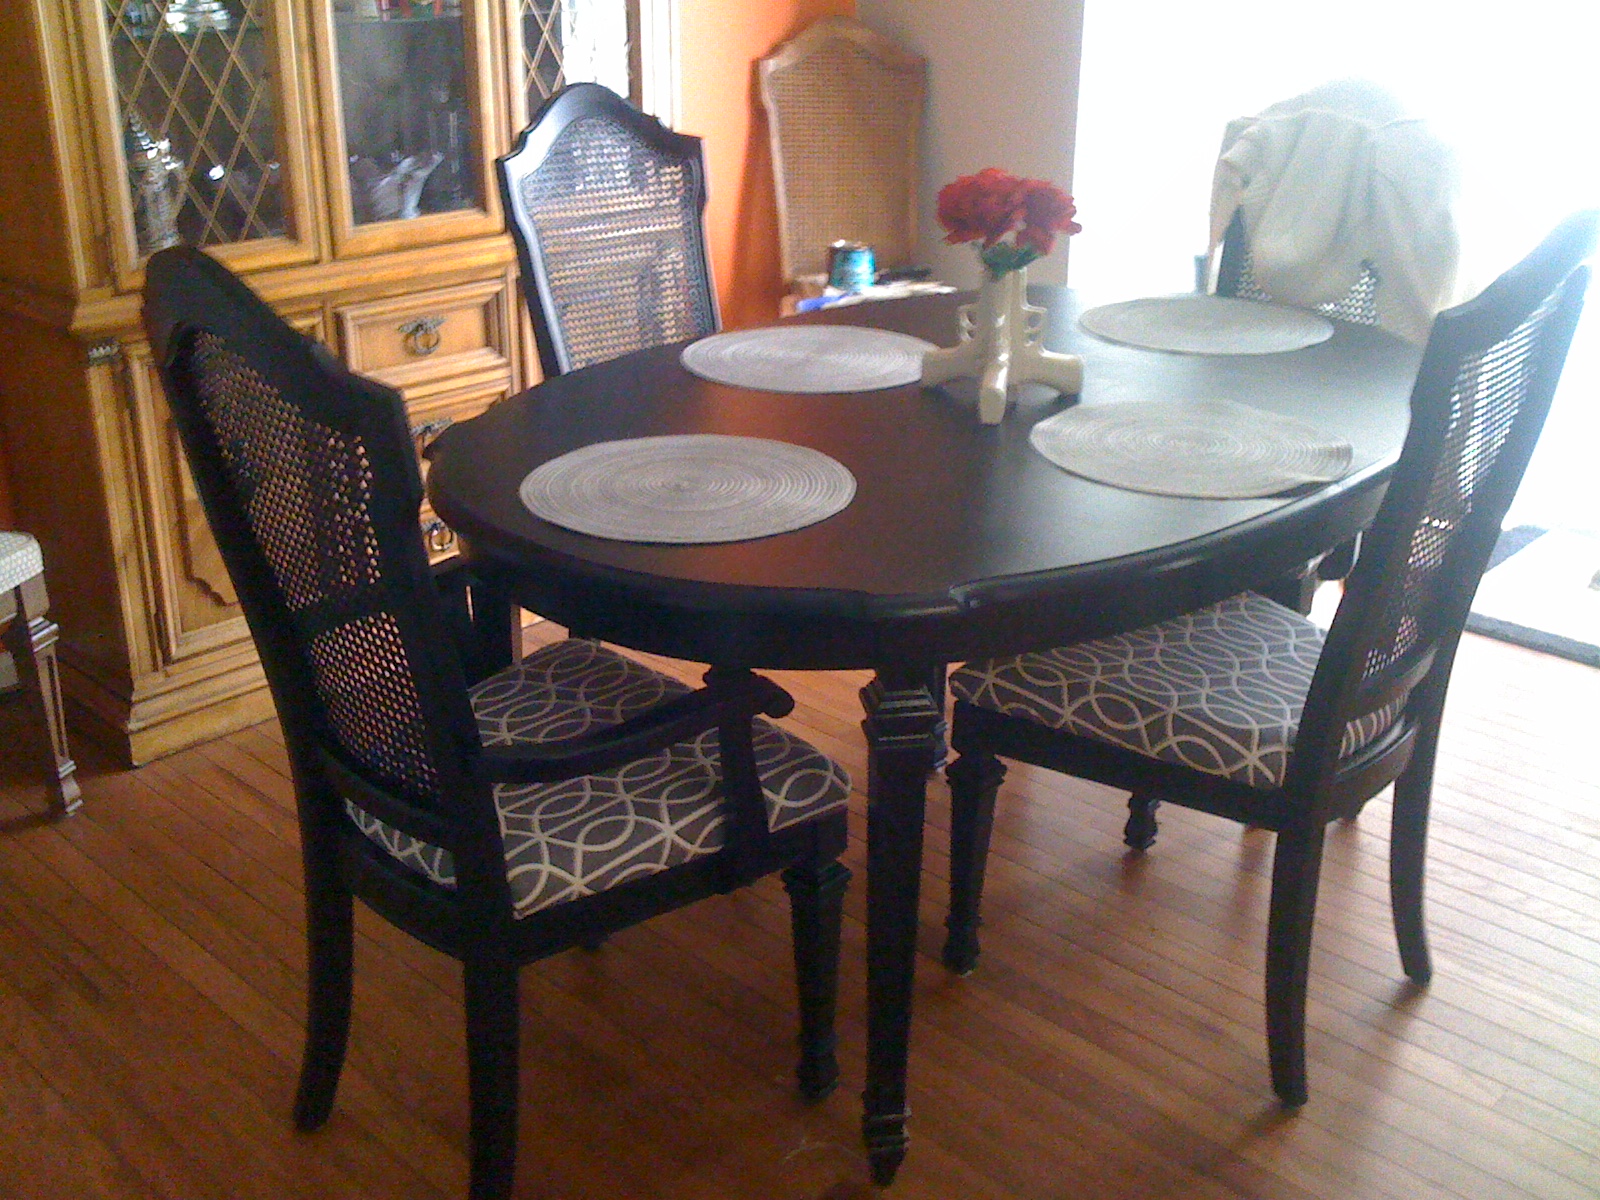 DIY: Refinishing a Dining Room Table